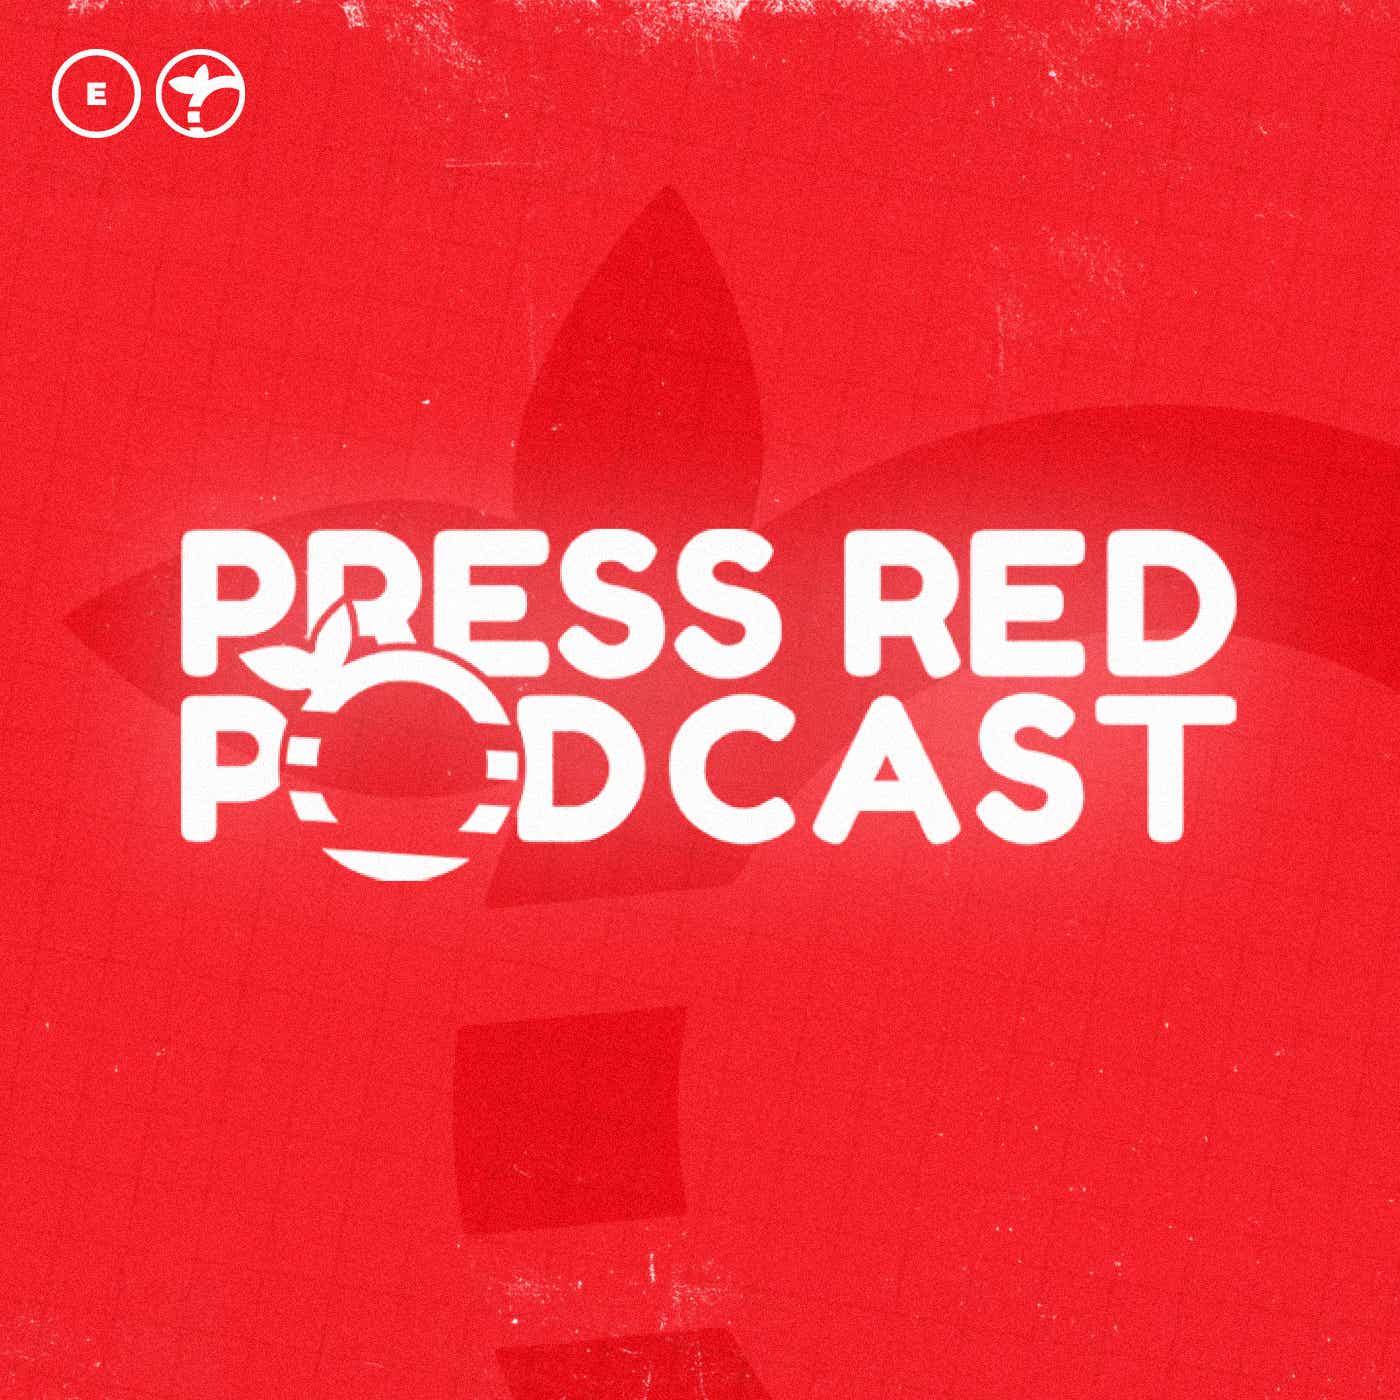 Press Red Podcast